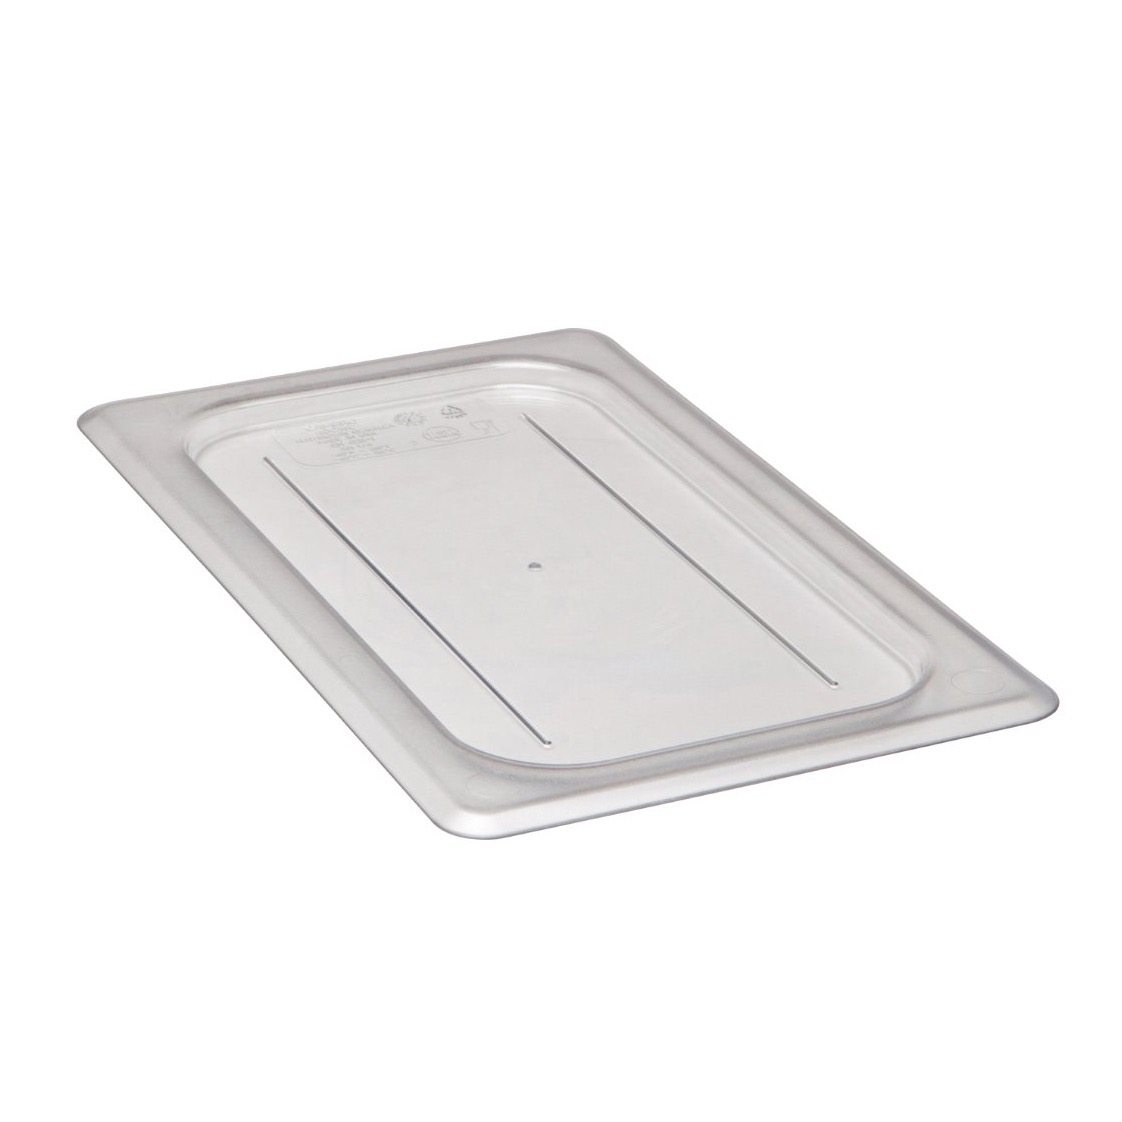 COVER 1/4 SIZE PAN PLAIN CLEAR